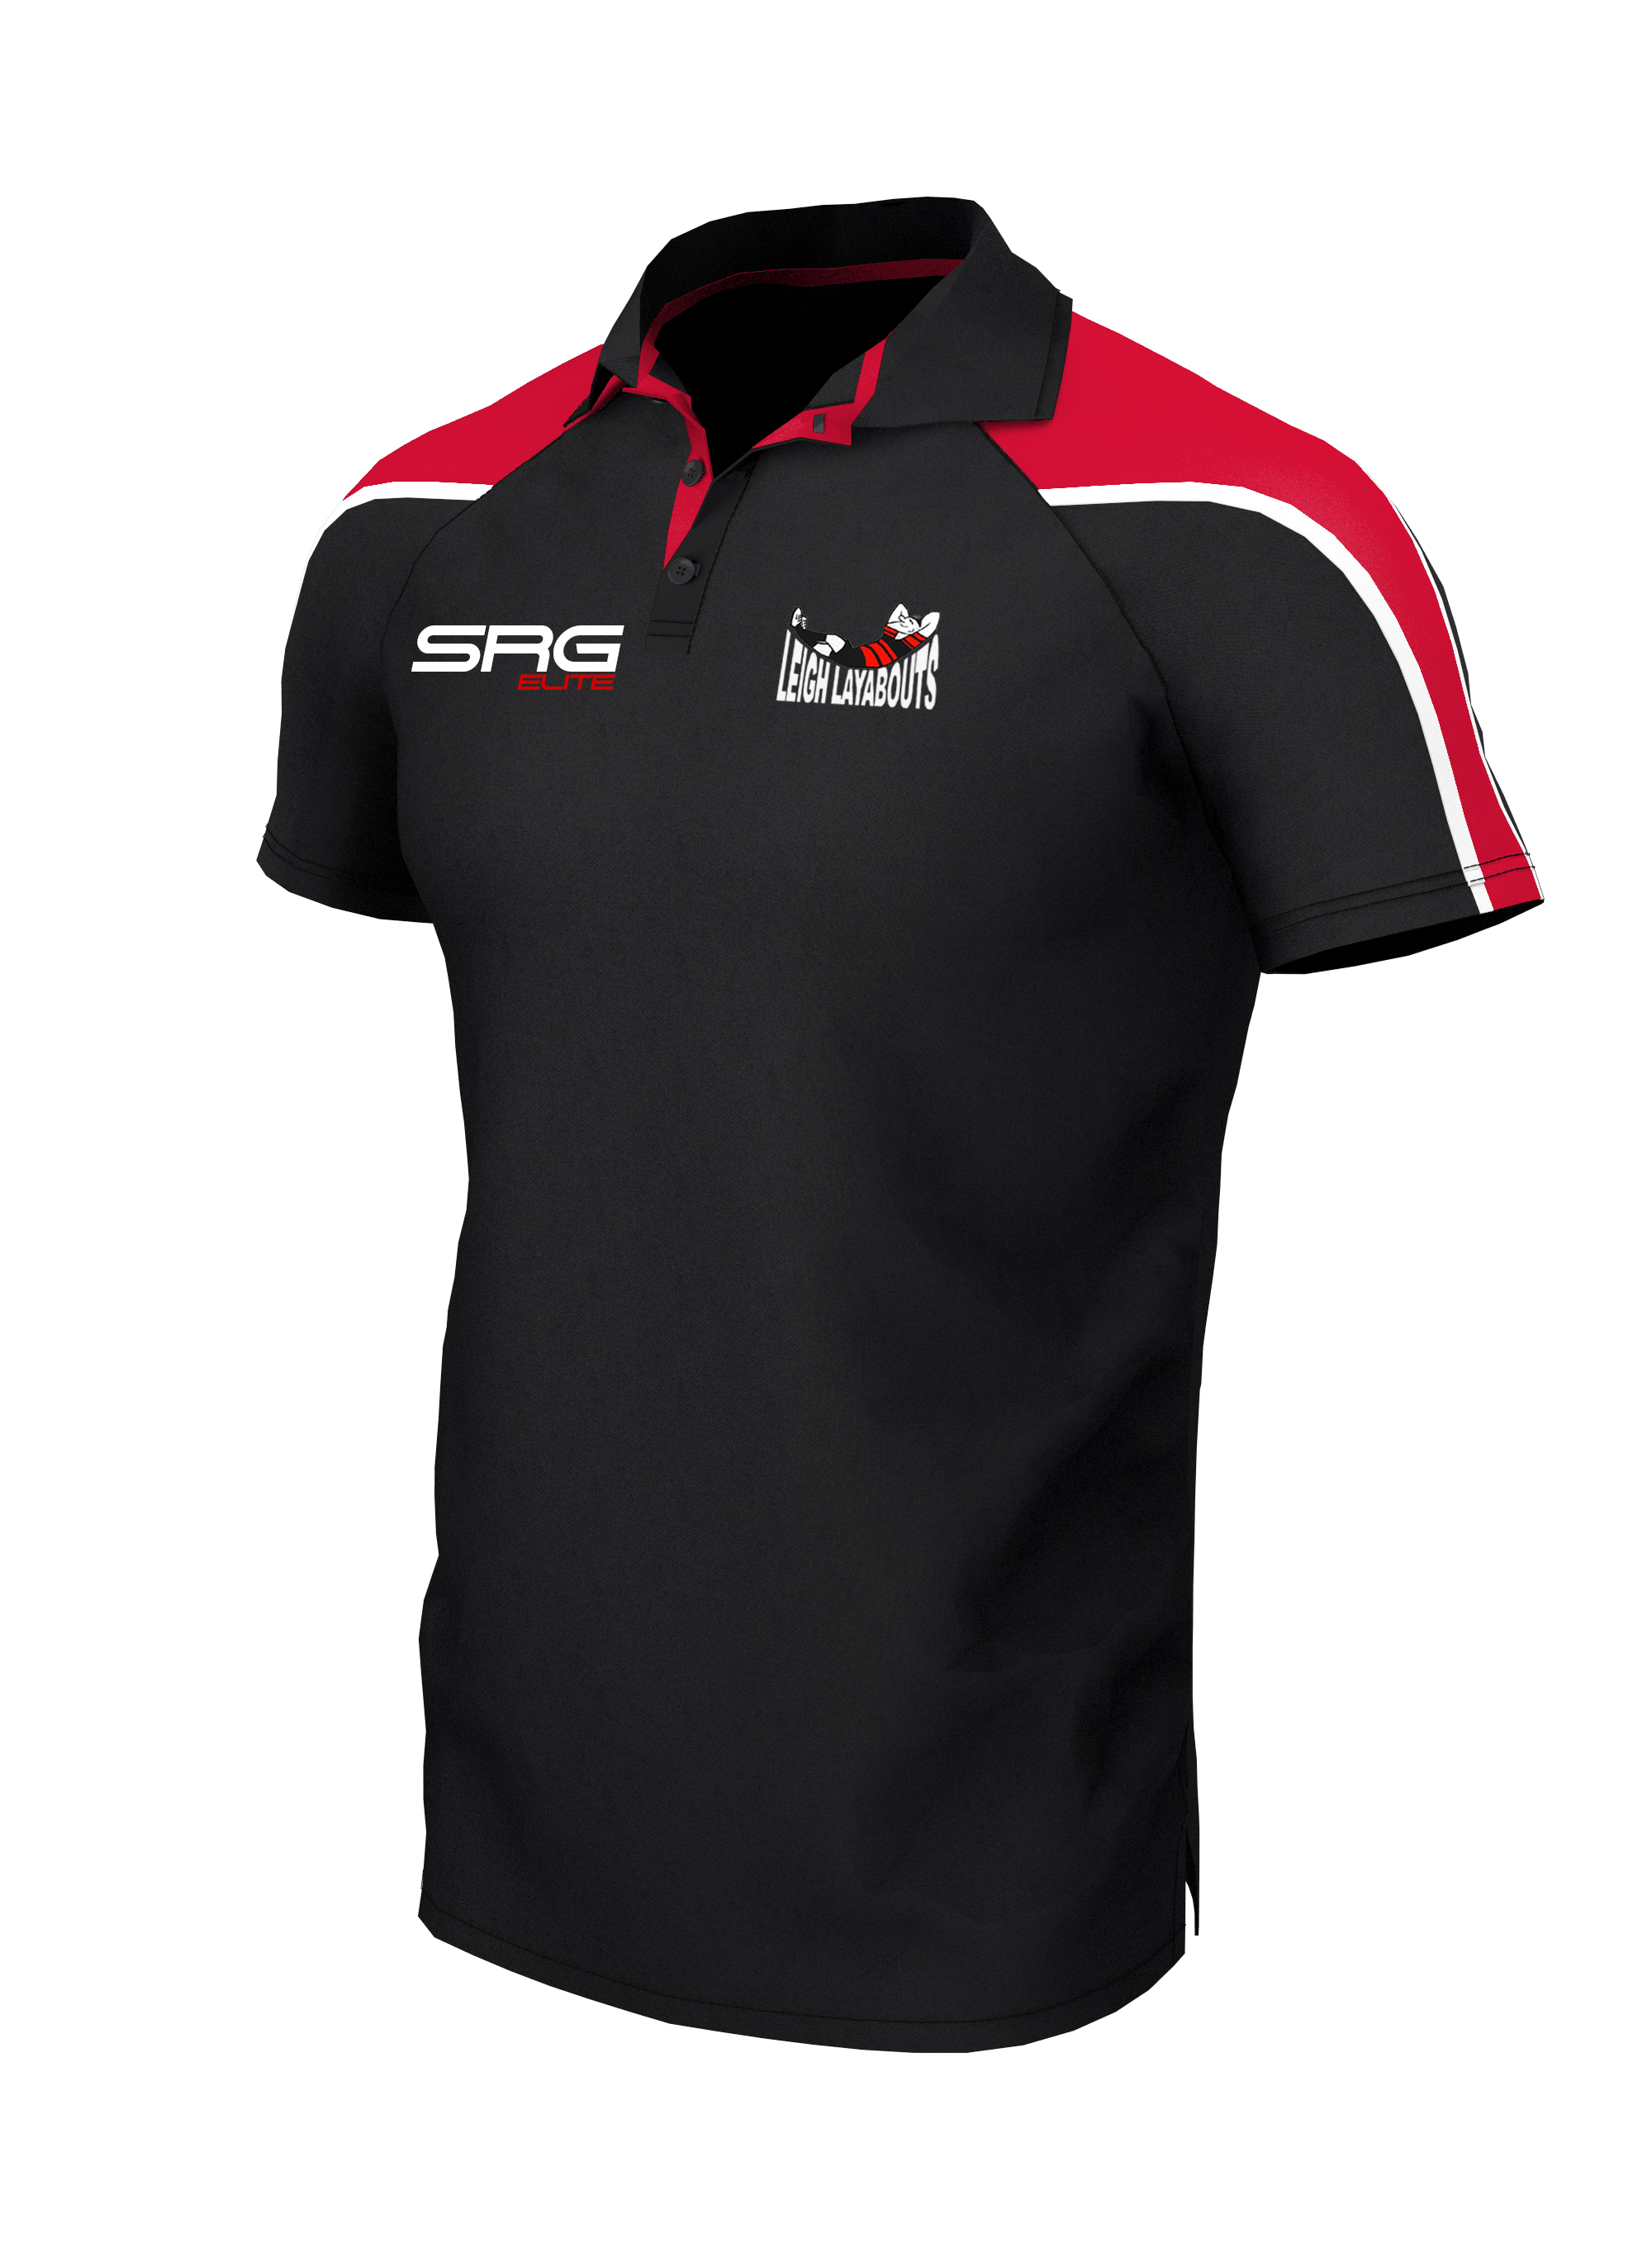 Layabouts Unisex Polo Shirt – Black/Red | SRG Elite